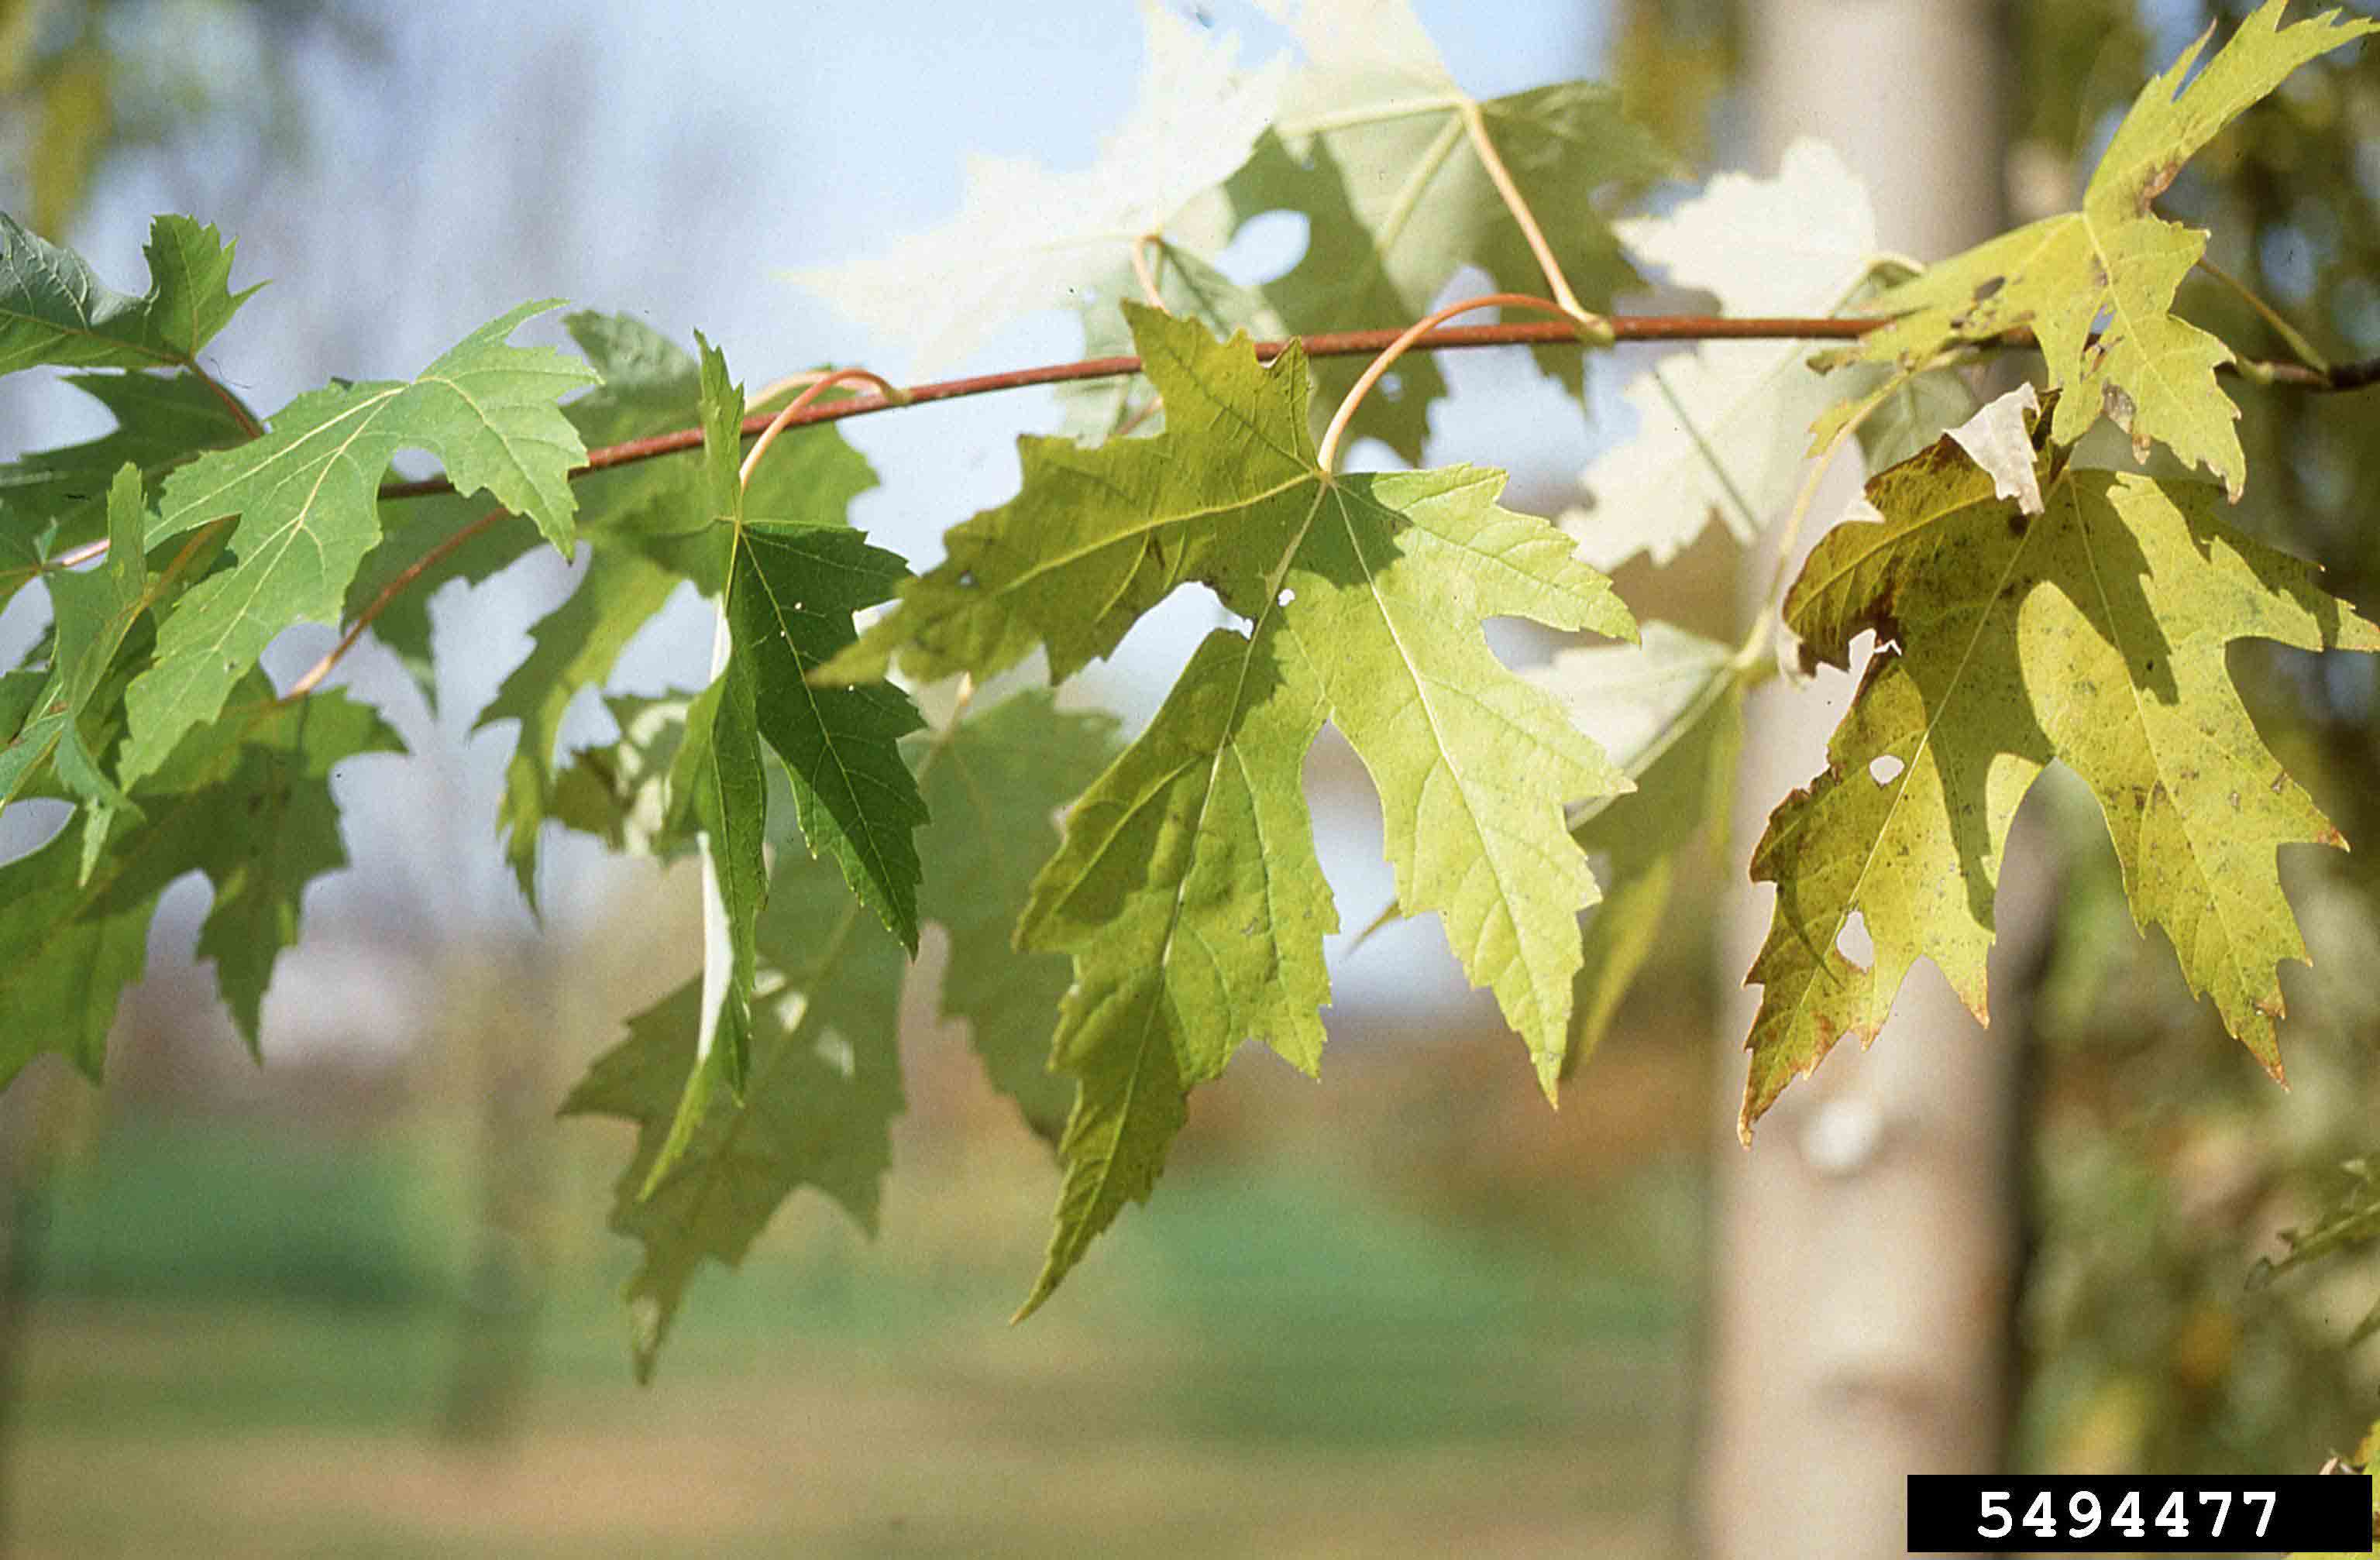 Silver maple leaves, showing opposite arrangement